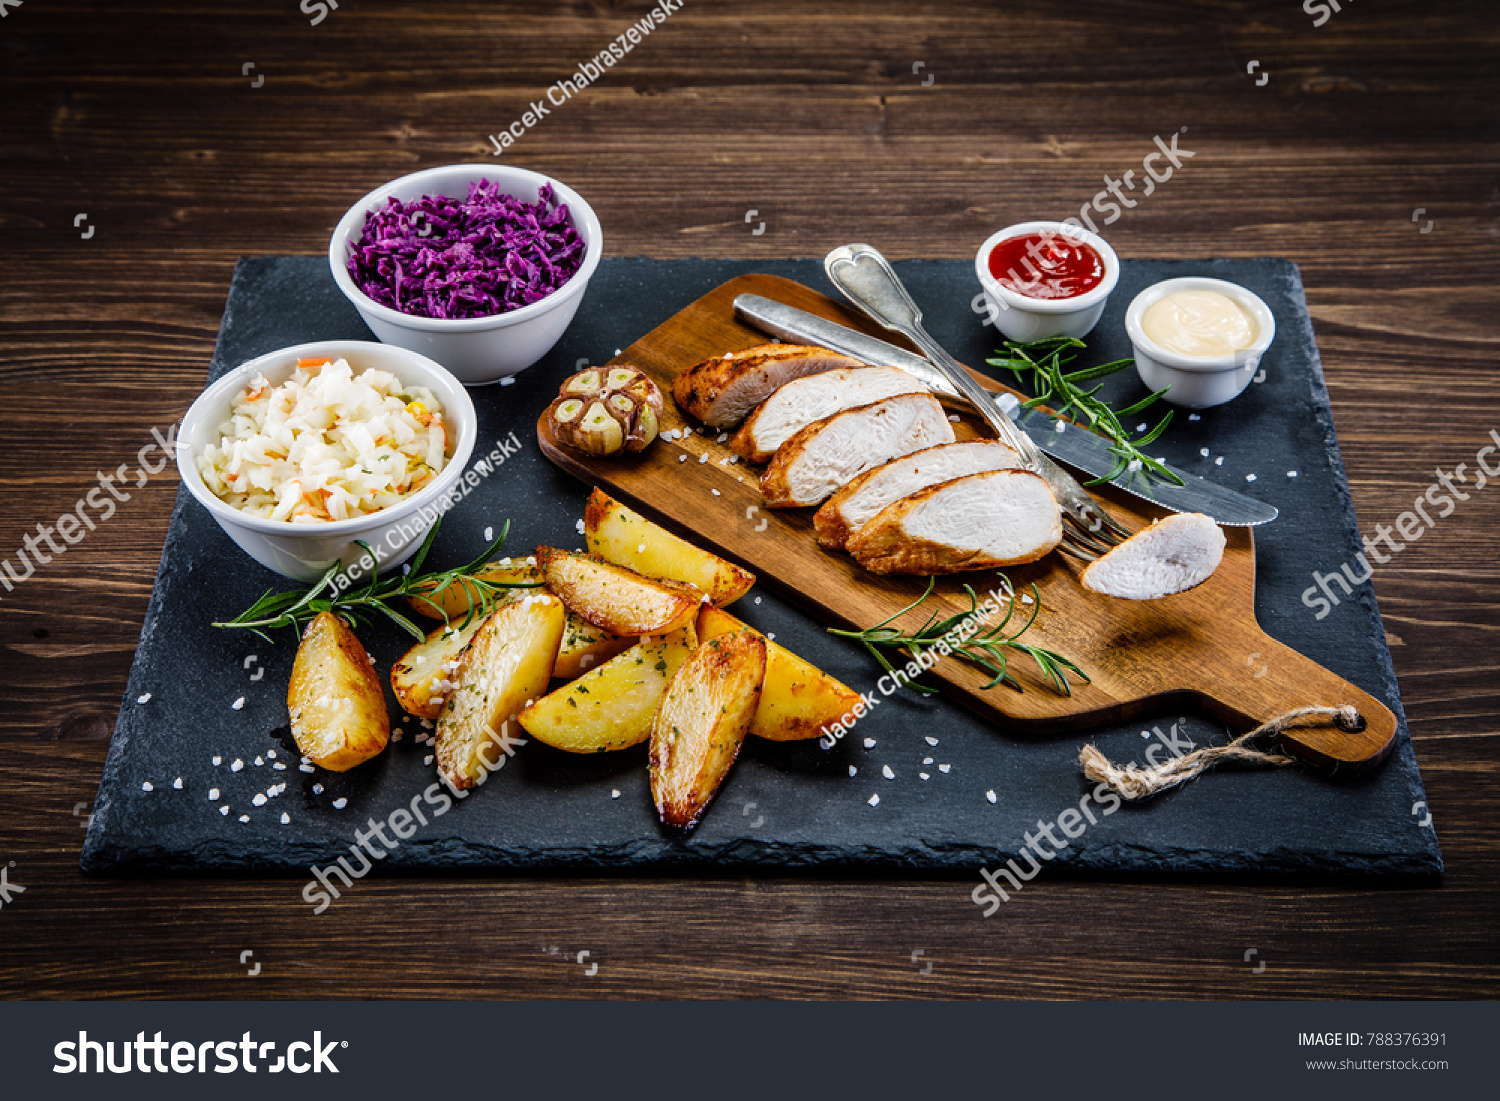 Roast chicken breast and baked potatoes on cutting board #788376391